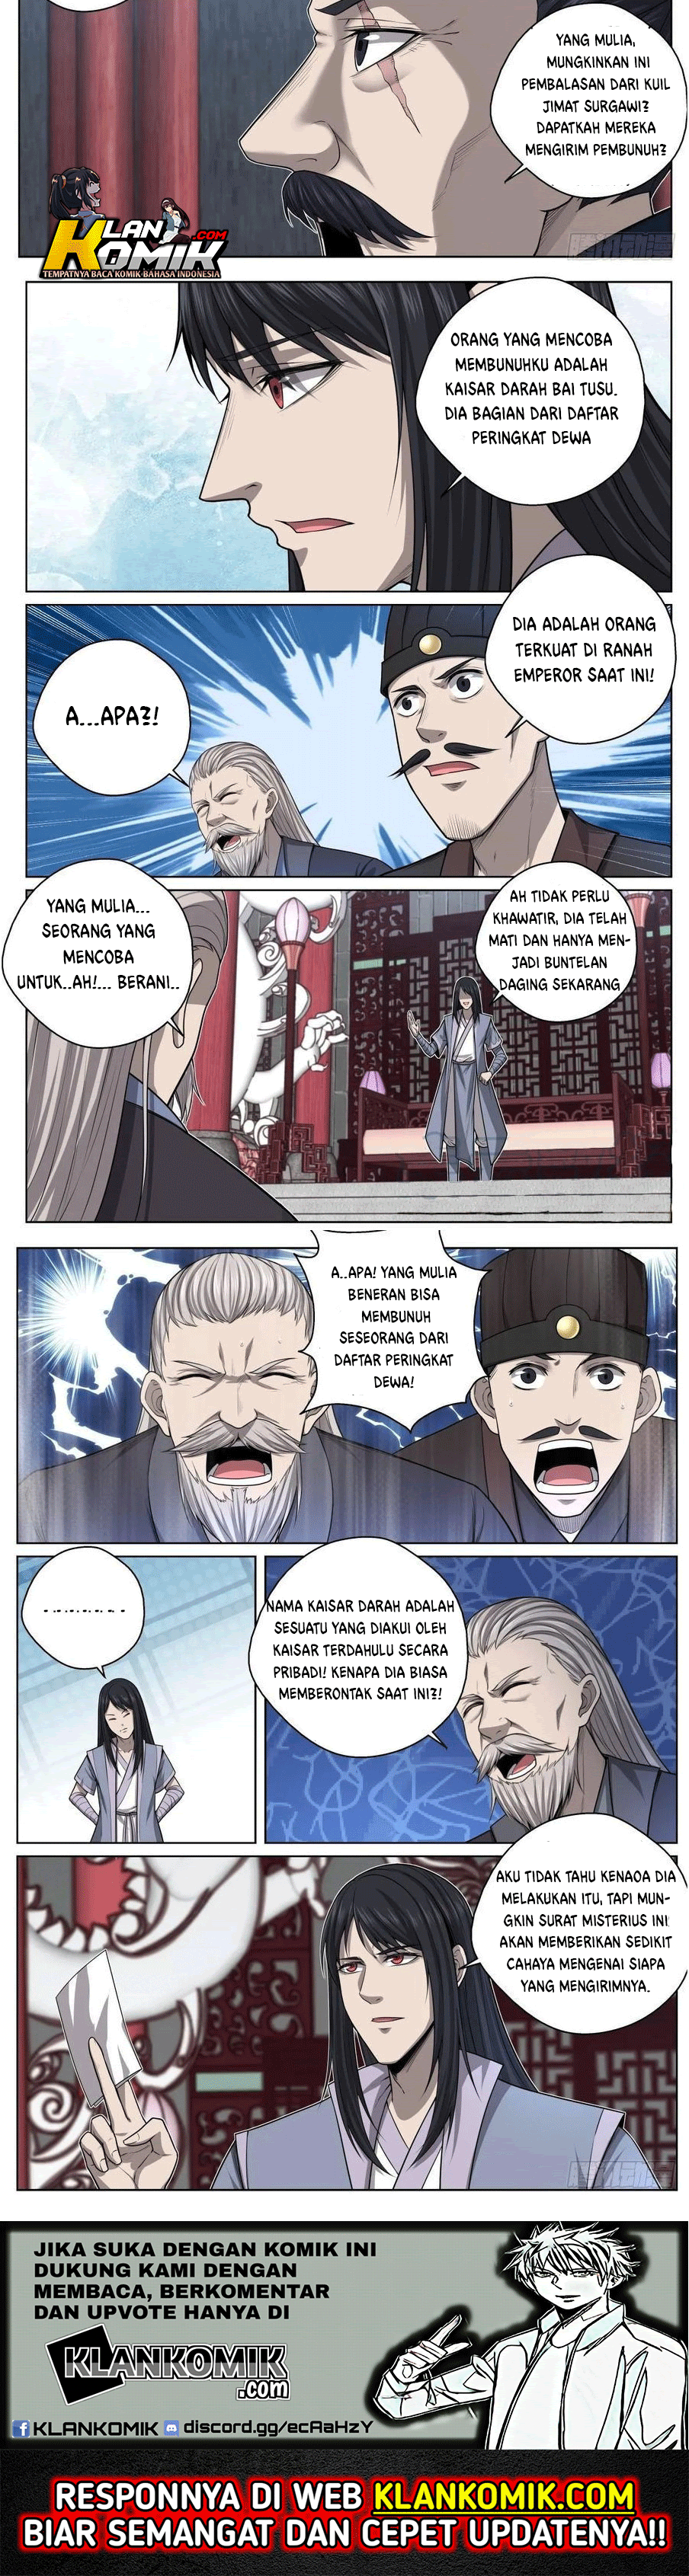 Extreme Mad Emperor System (Supreme Mad Emperor System) Chapter 31